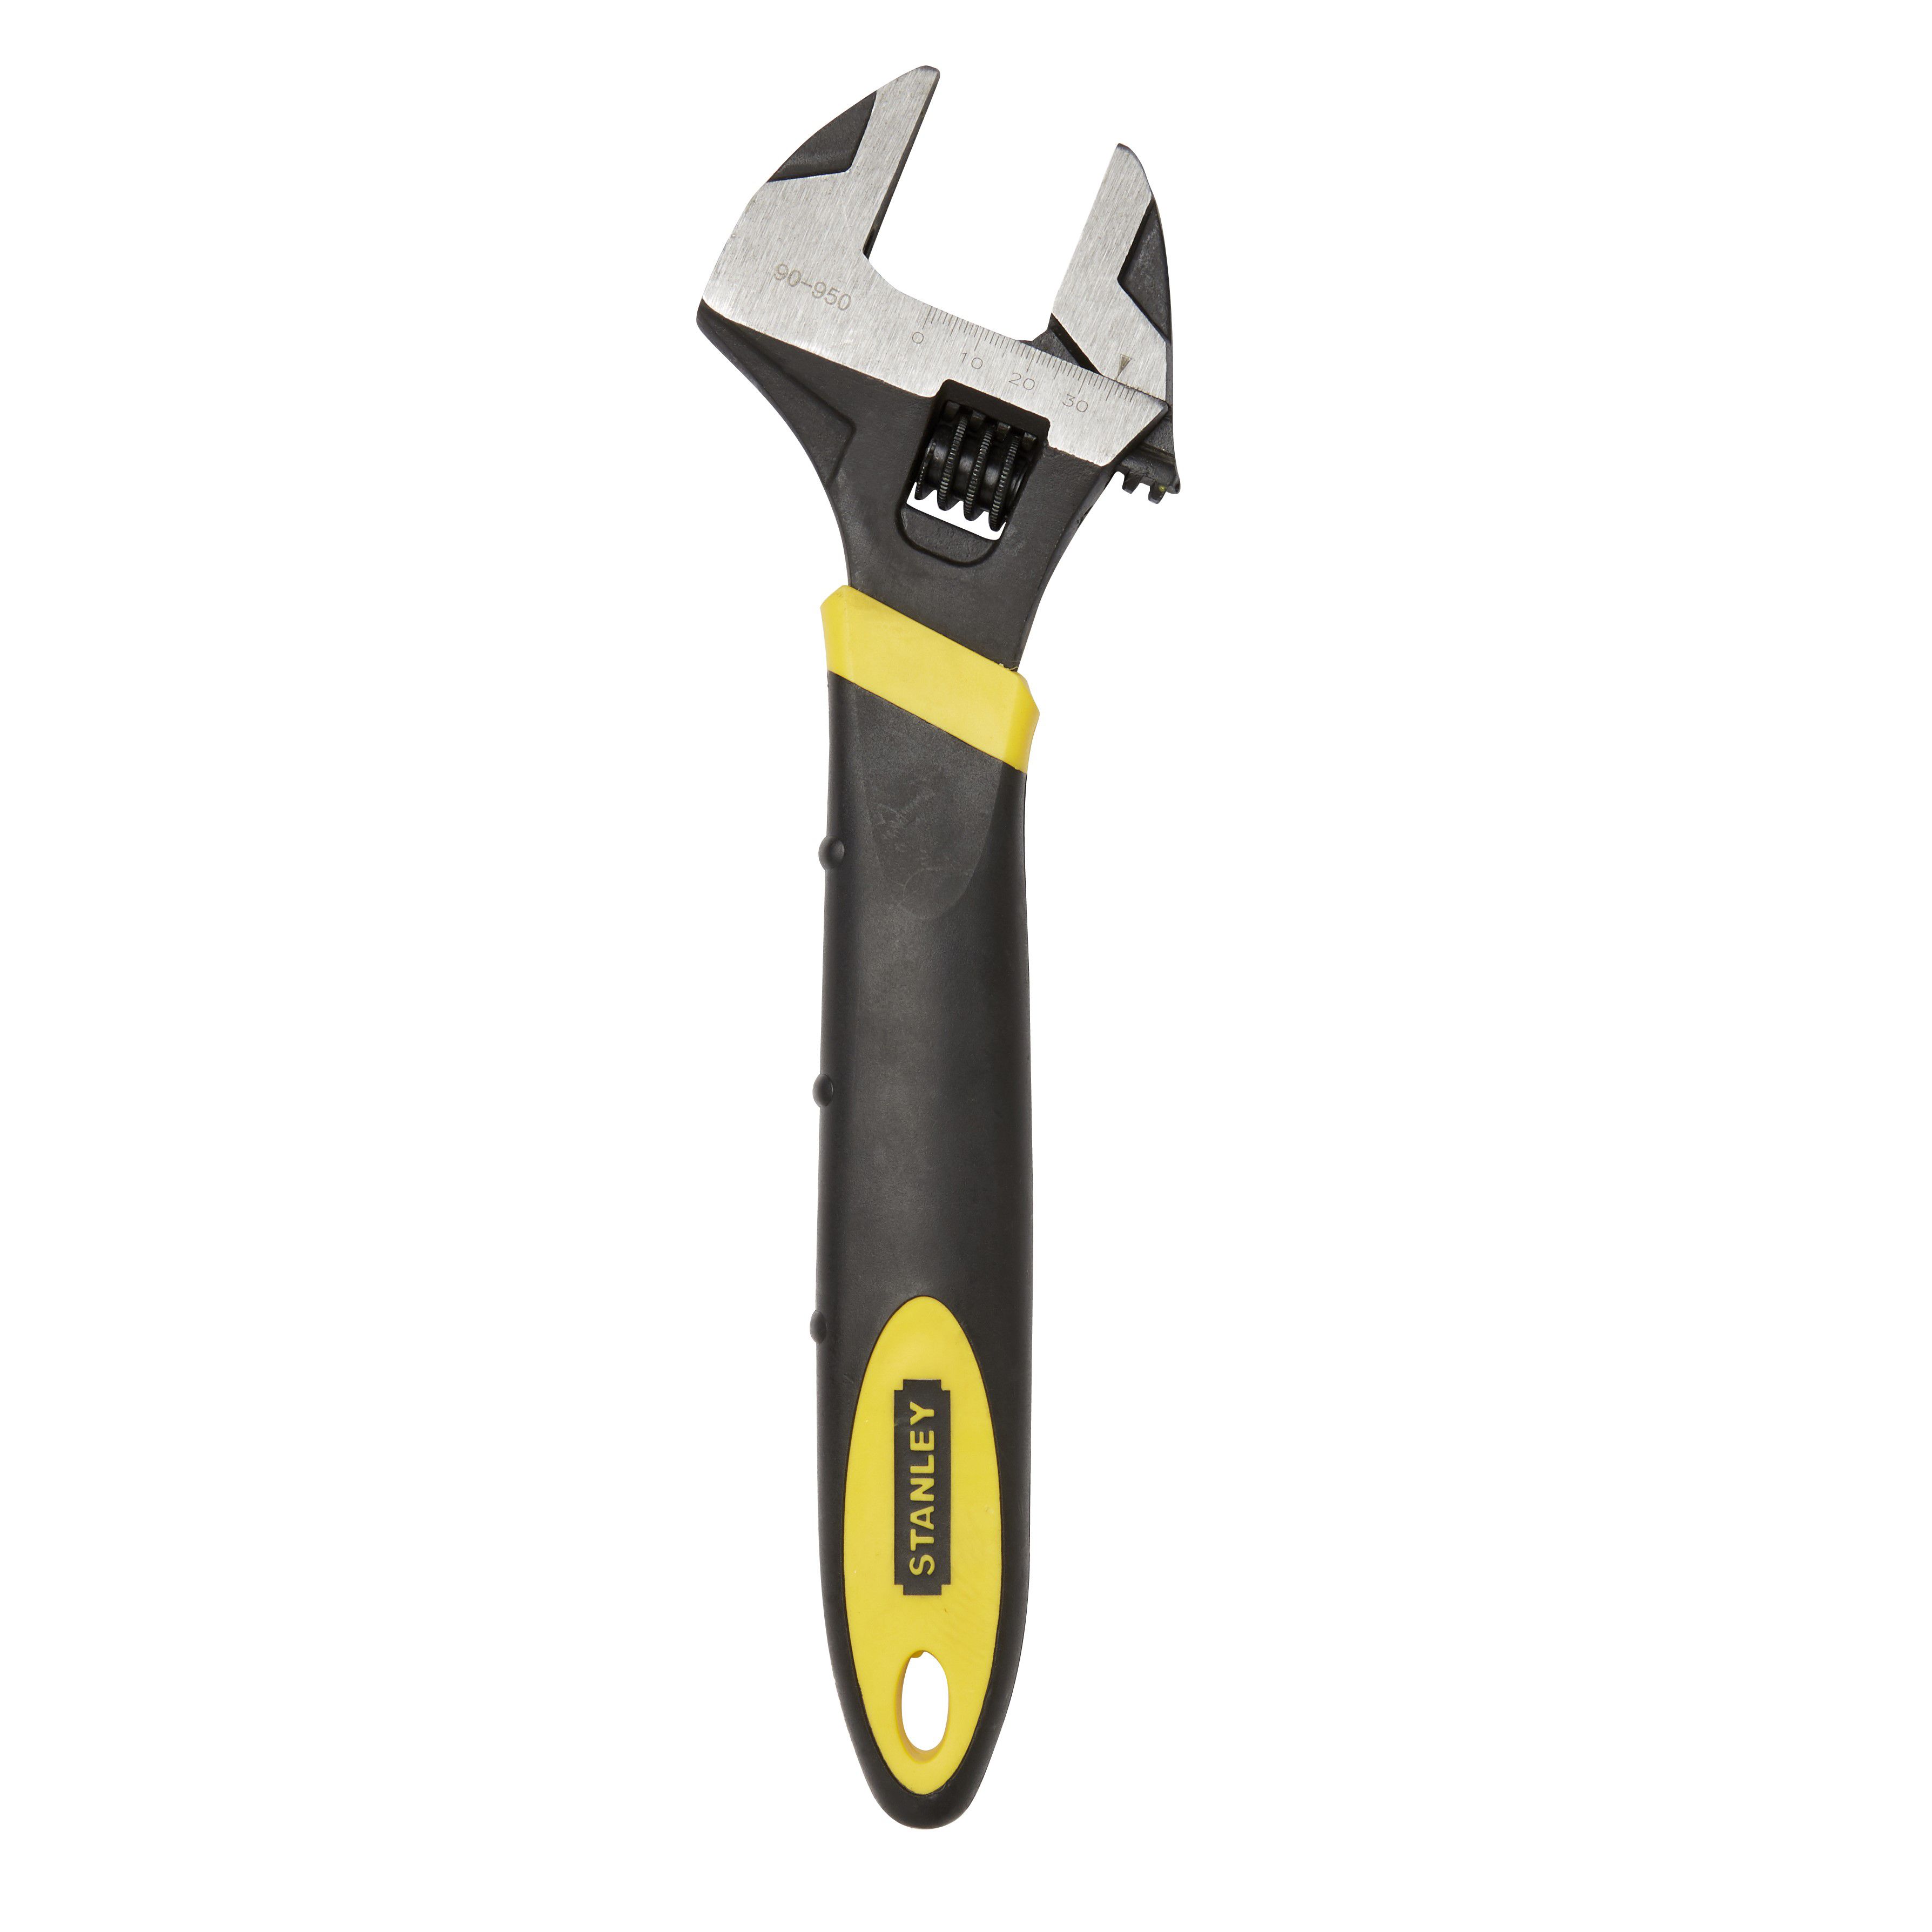 Stanley 305mm Adjustable wrench